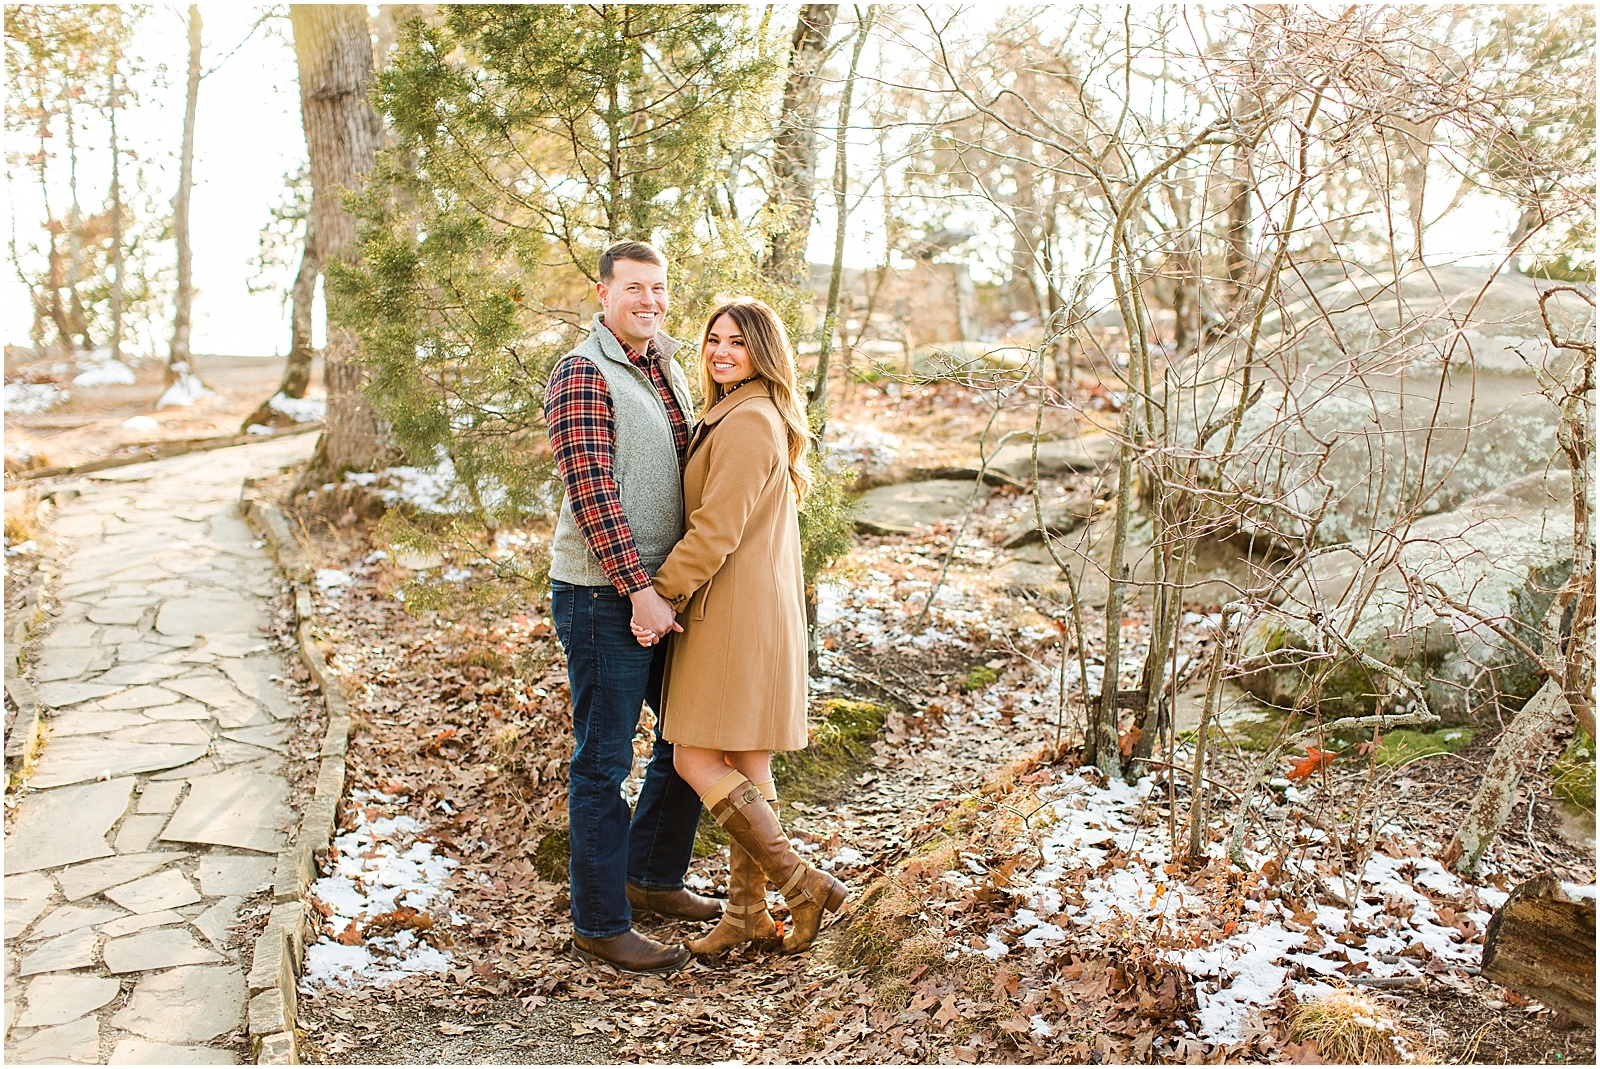 A Sunny Garden of the Gods Engagement Session | Shiloh and Lee | Bret and Brandie Photography024.jpg